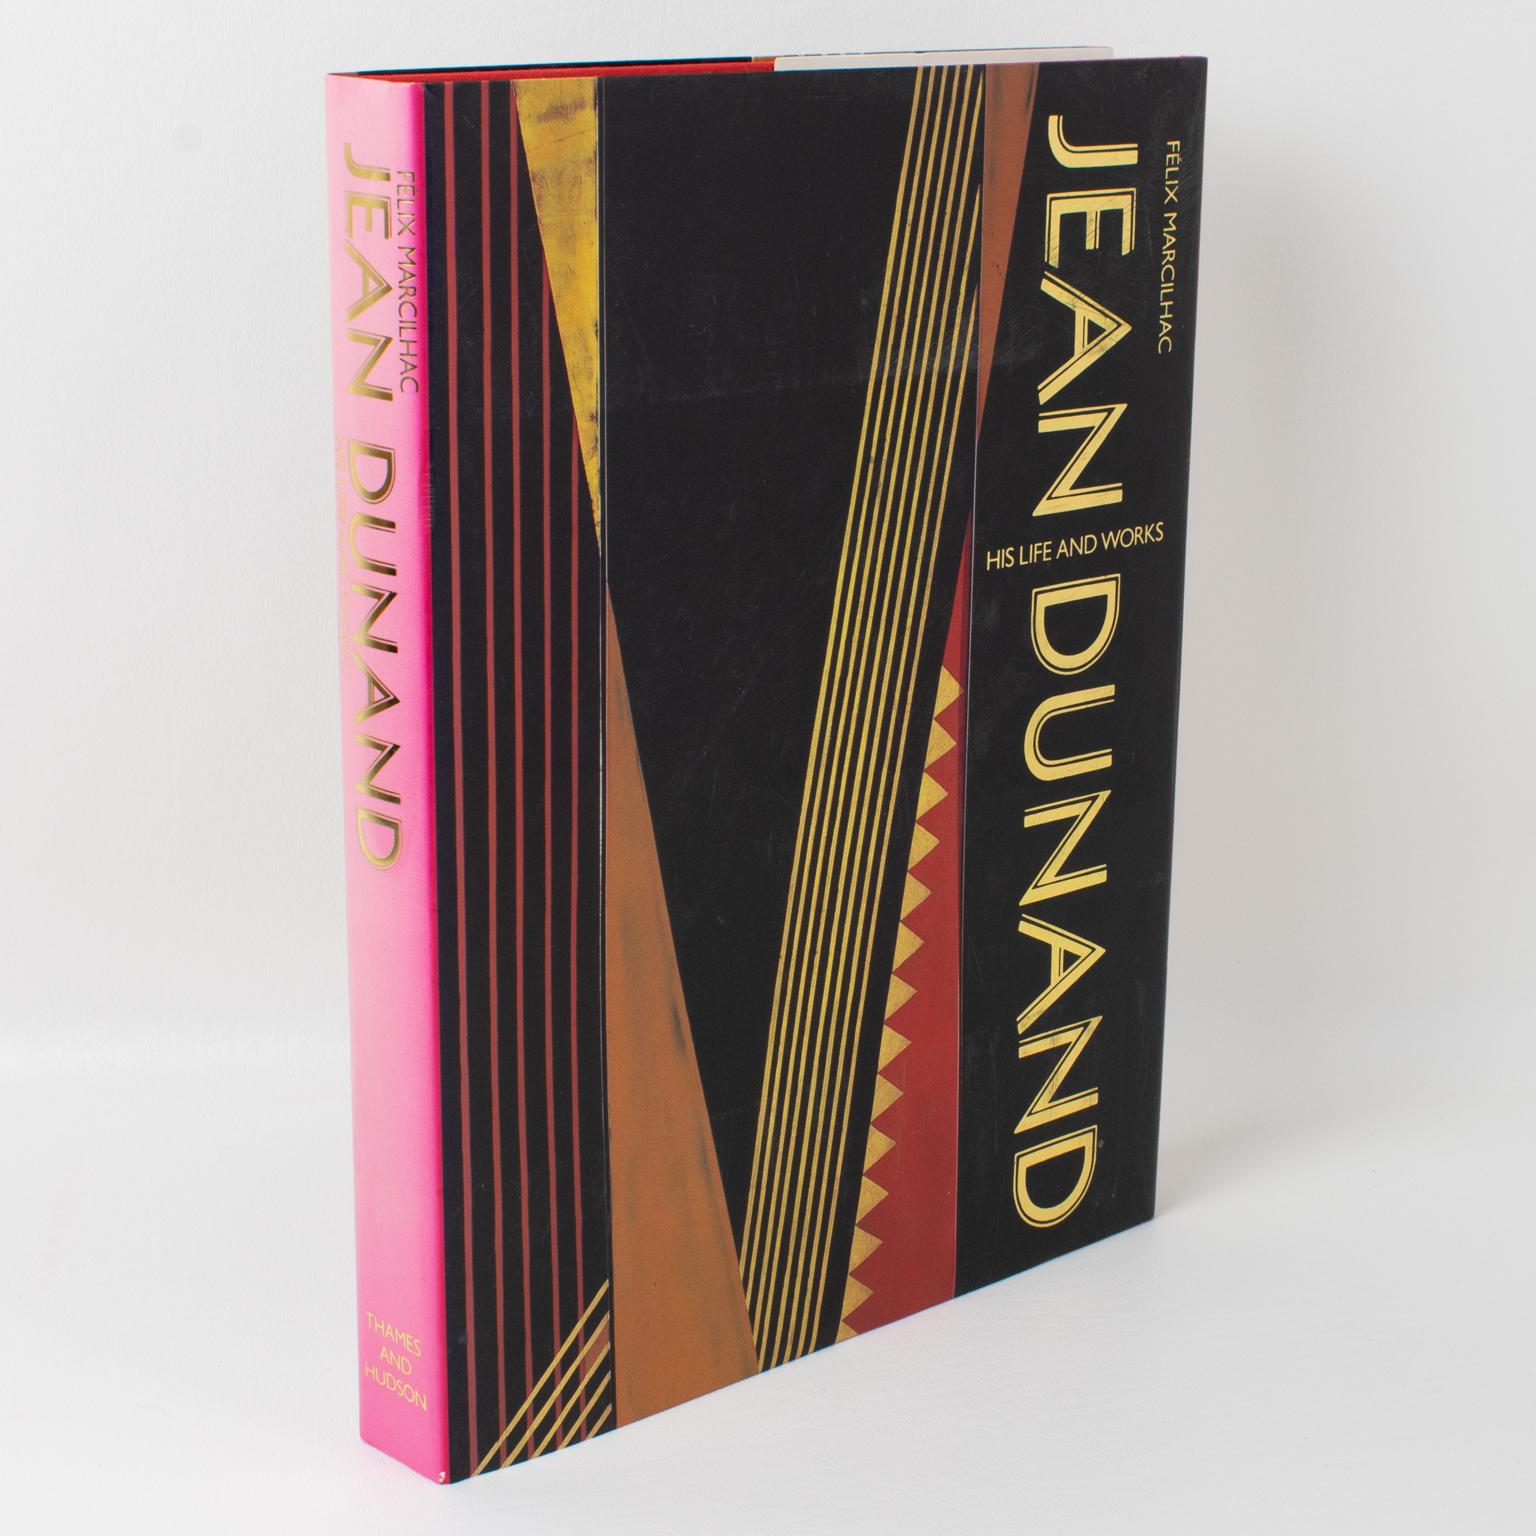 Jean Dunand, His Life and Works, English book by Felix Marcilhac, 1991.
The revival of interest in Art Deco and the applied and decorative arts of the 1920s and 1930s led to the rediscovery of its principal practitioners.
This book is a